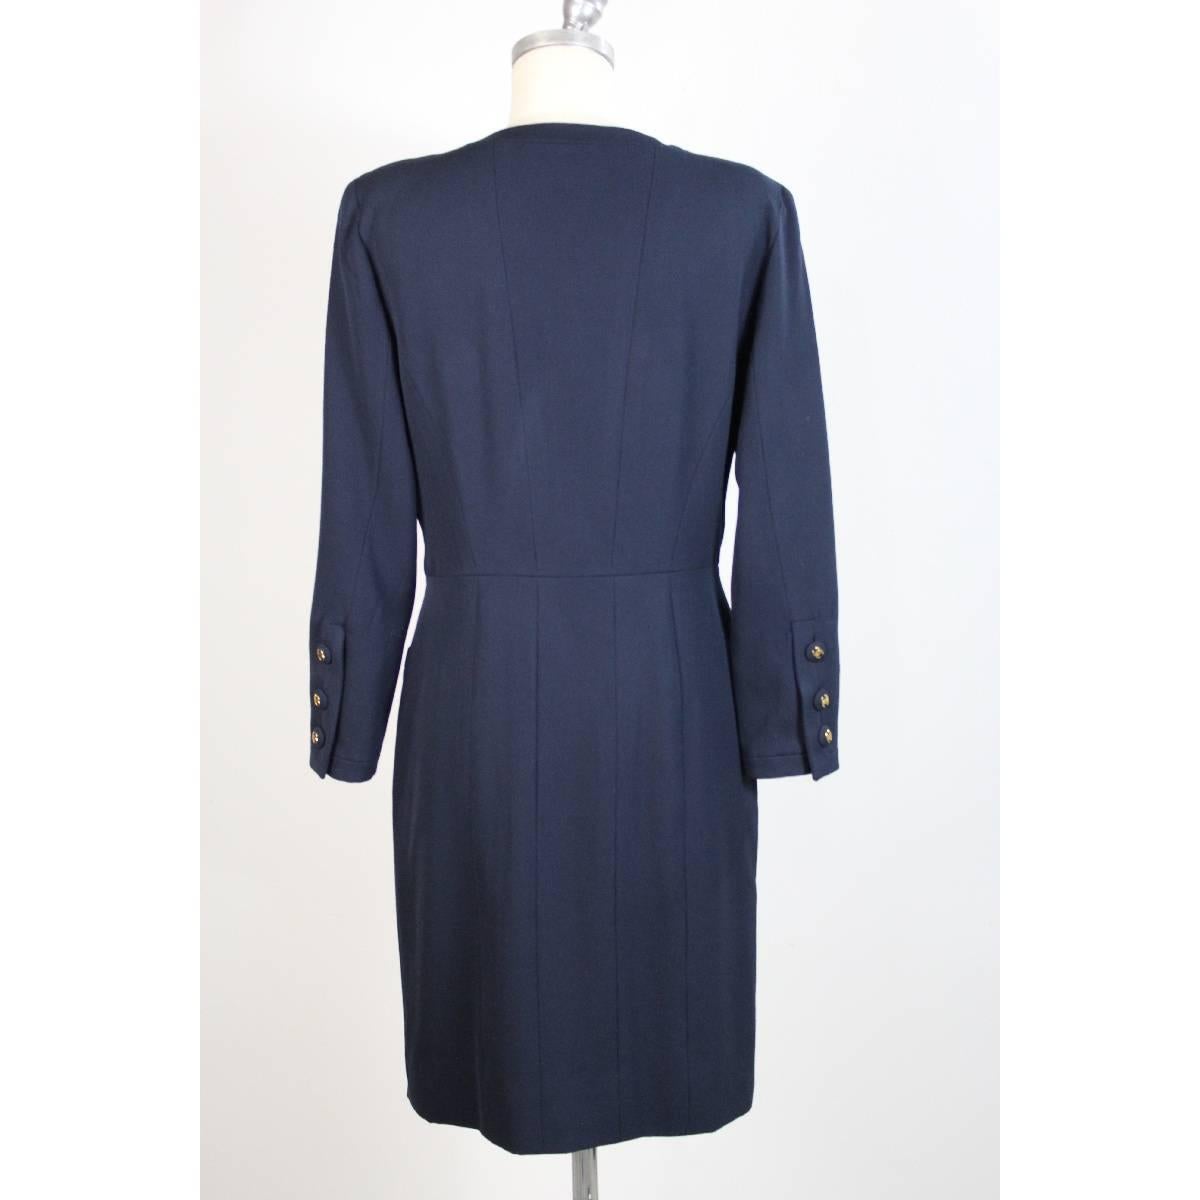 Chanel Boutique long knee-length dress, dark blue wool, placket along the dress with gold buttons logo, two pockets on the sides and two on the chest, long sleeves, size 44 it, dress lined inside with chanel logo. Excellent vintage conditions.

Size